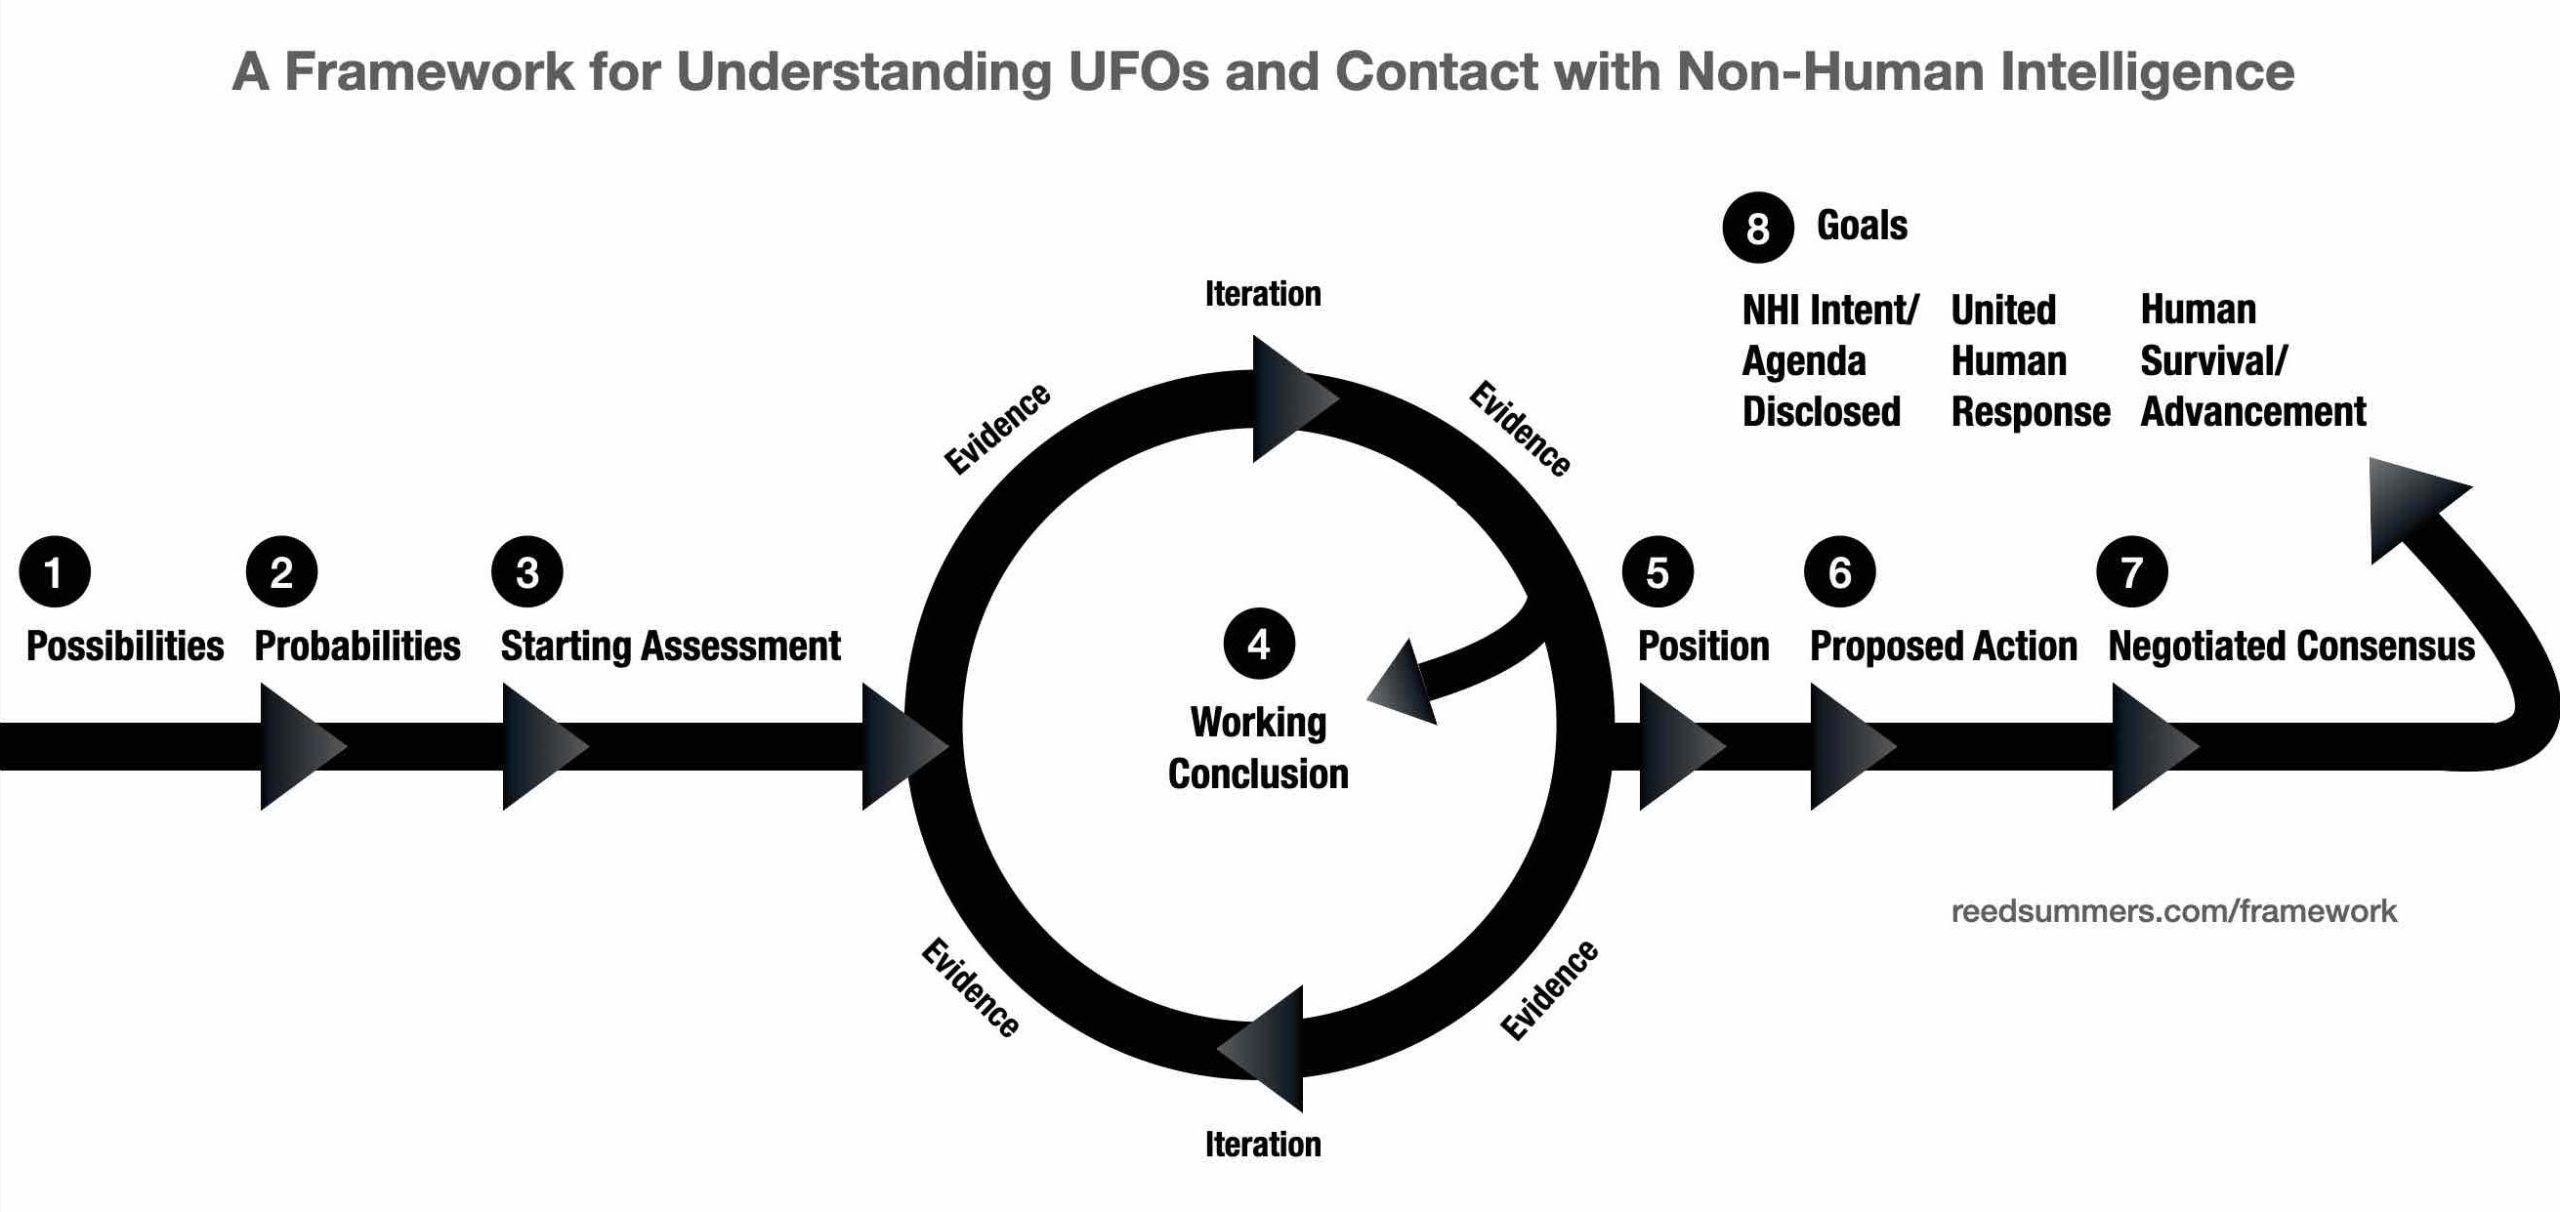 A Framework for Understanding UFOs and Contact with Non-Human Intelligence